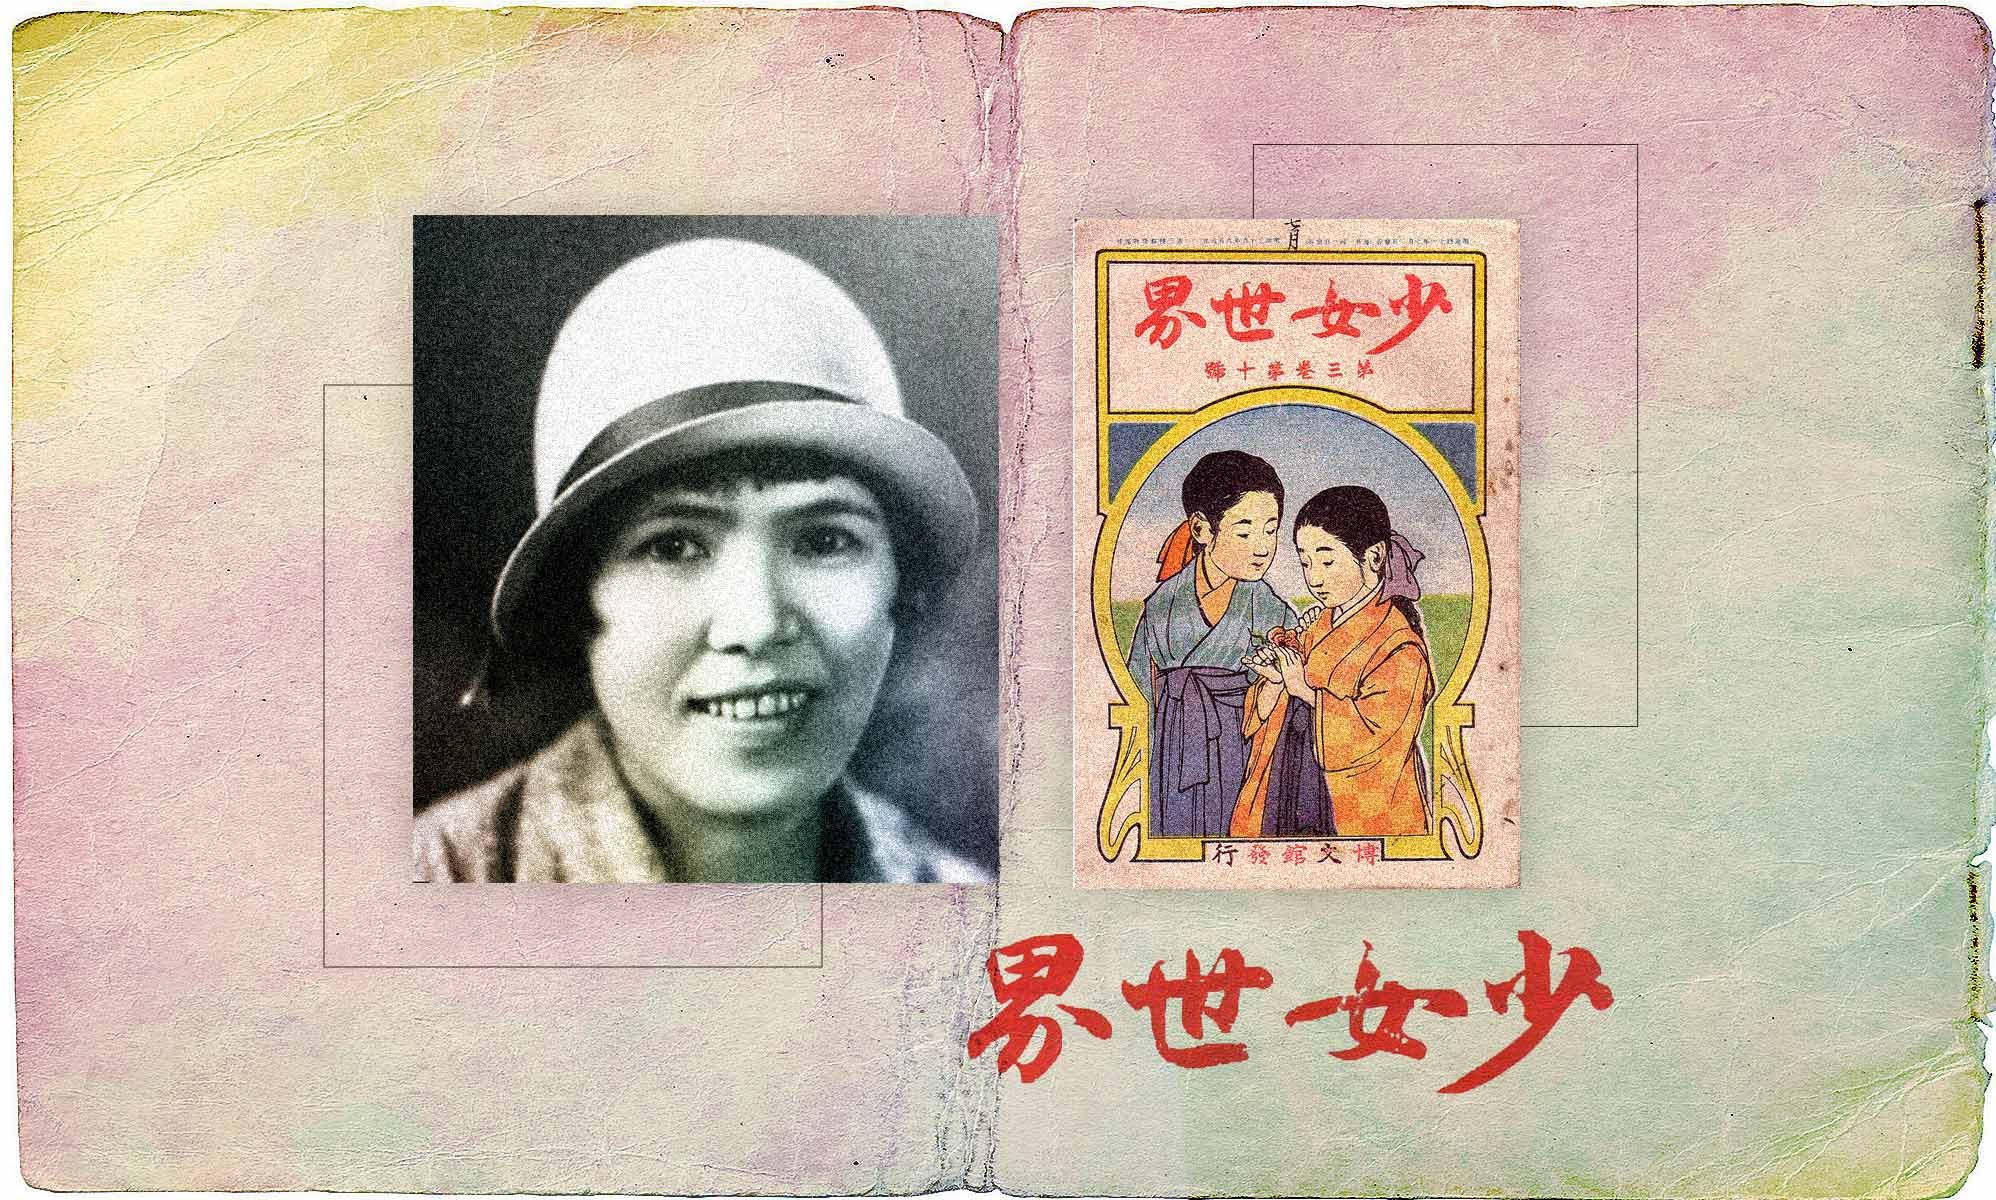 Nobuko Yoshiya: Queer Japanese icon who adopted her girlfriend to get around same-sex marriage ban